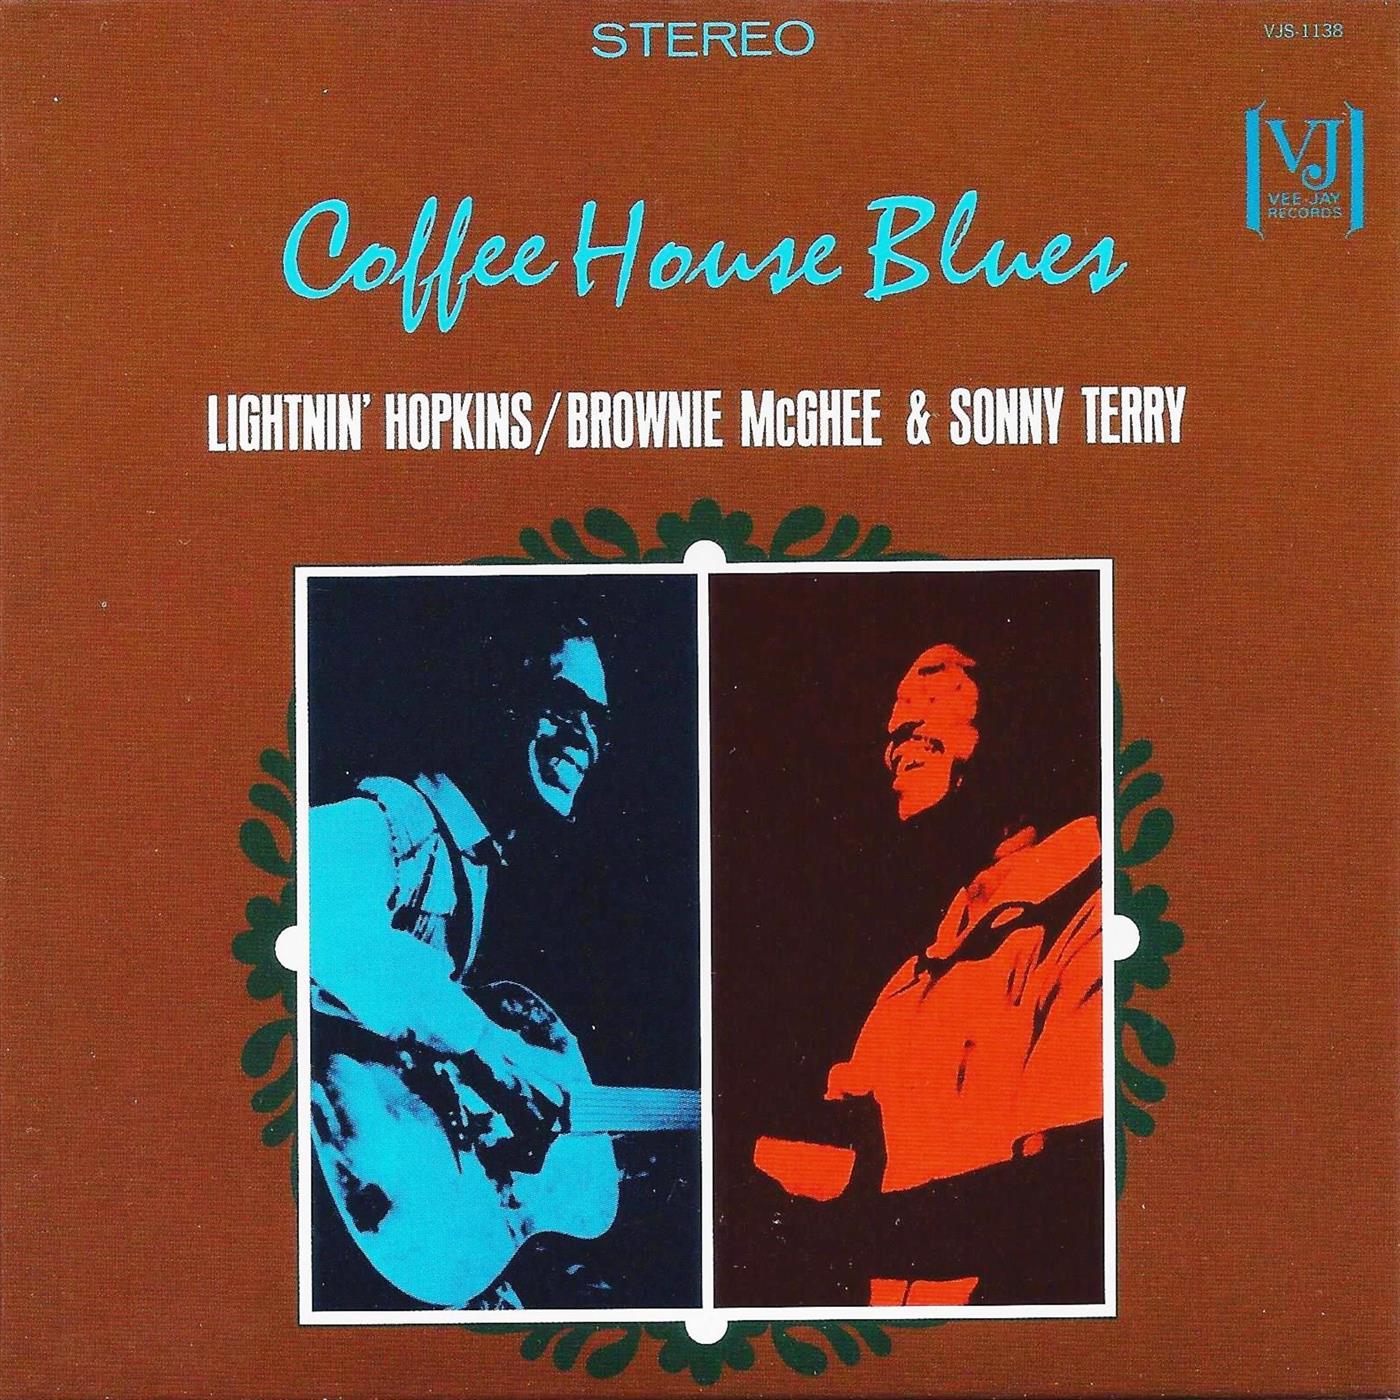 Blues For Gamblers / Lightnin' Hopkins with Brownie McGhee & Sonny Terry